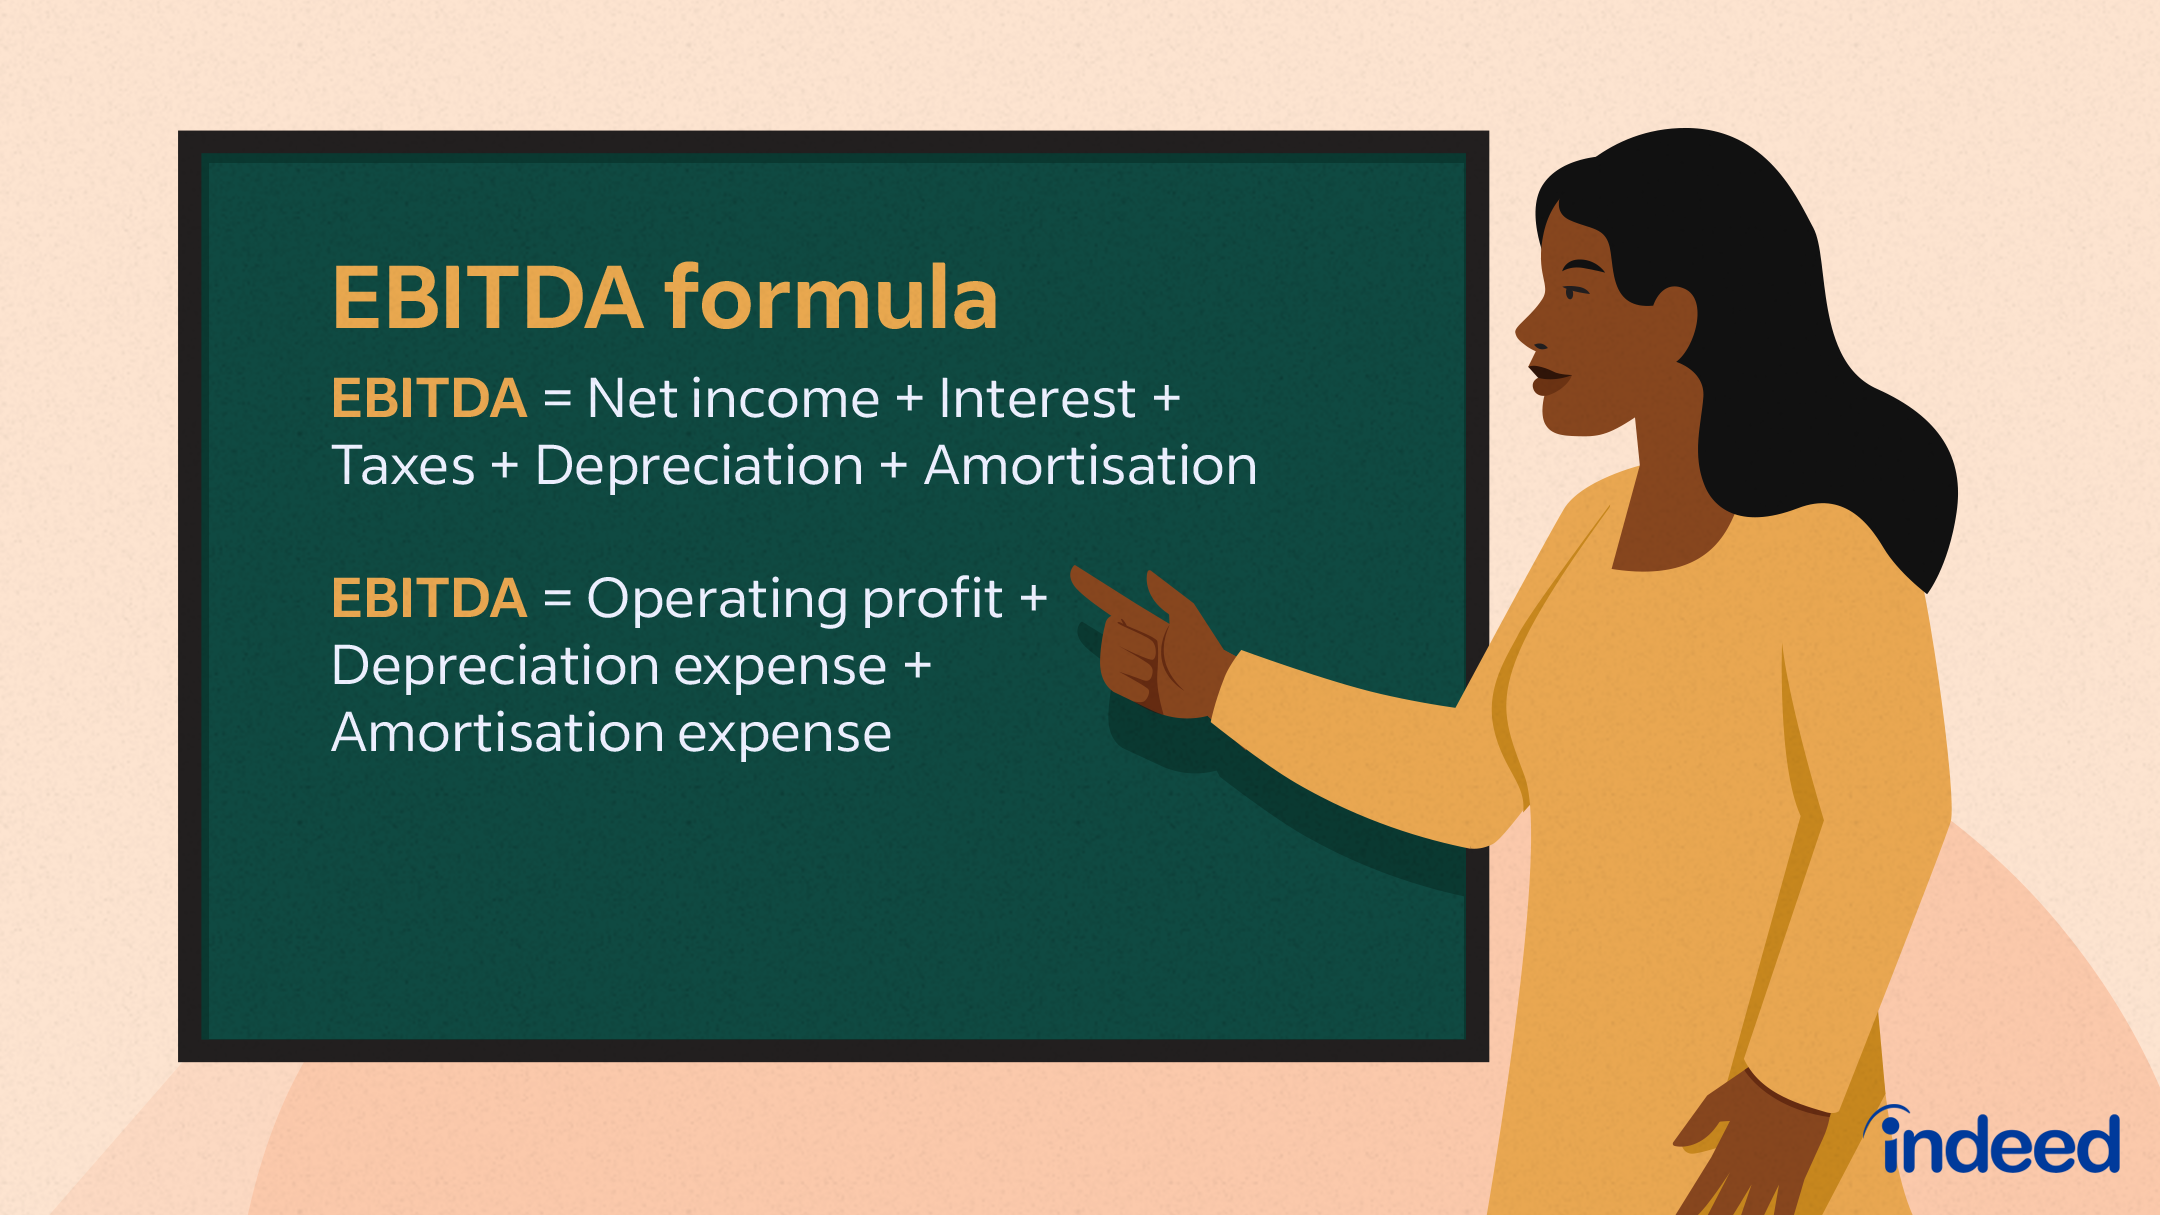 Earnings Before Interest and Taxes (EBIT): Formula and Example